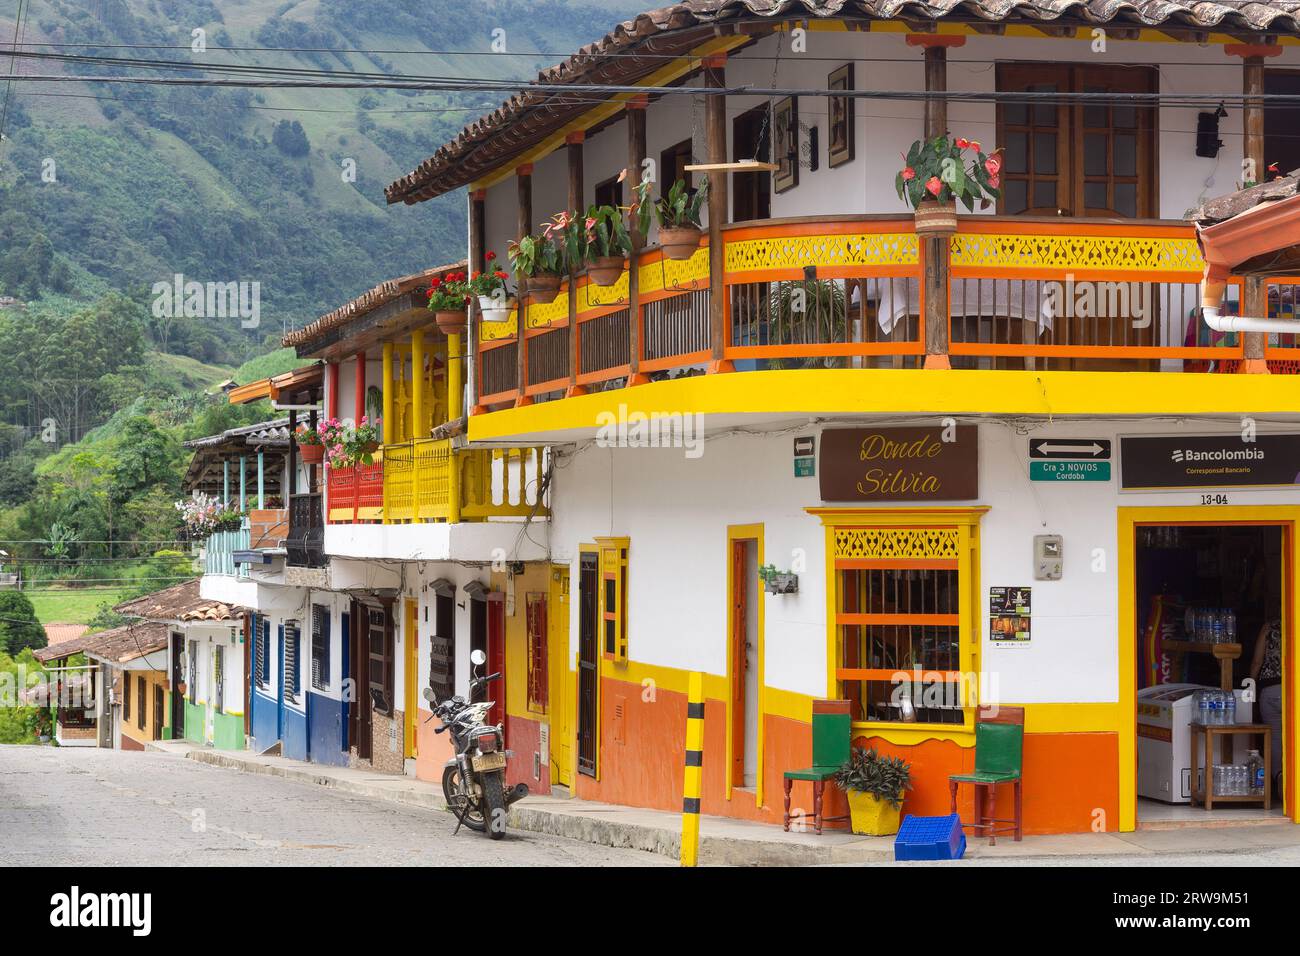 Colourful buildings in the picturesque village of Jardin, Antioquia, Colombia. Stock Photo